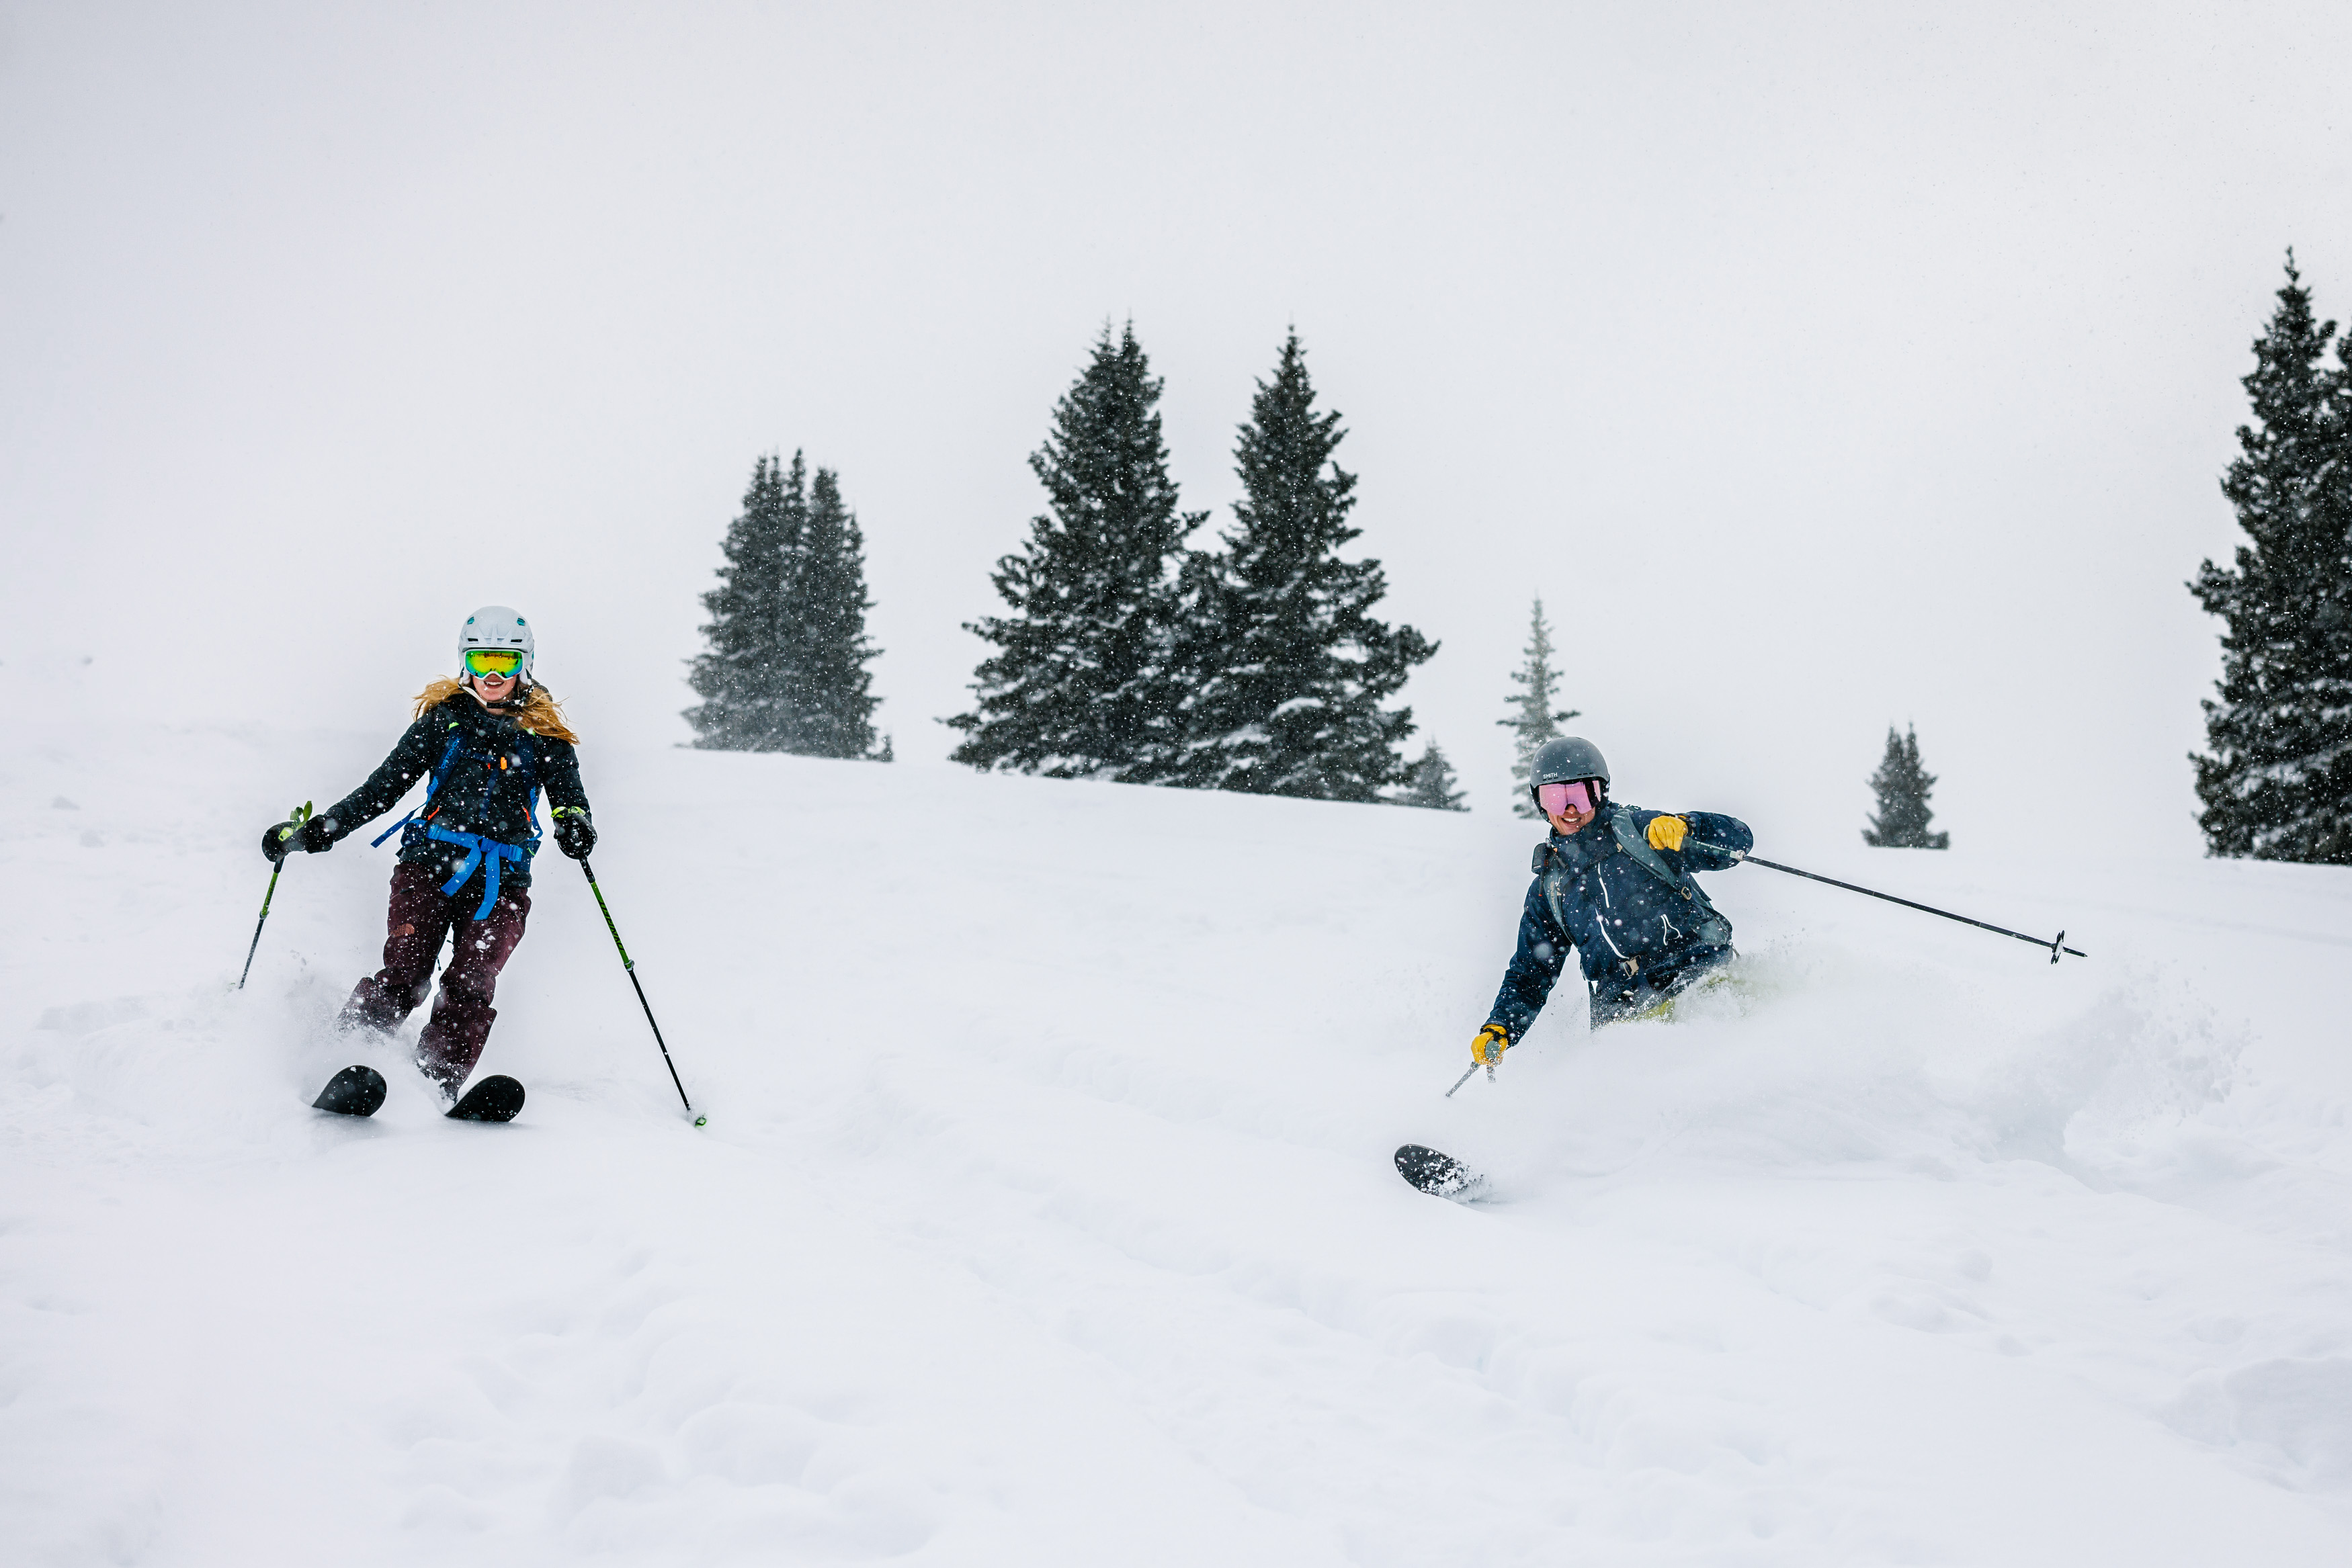 Blake & Laurens engagements backcountry skiing on Shrine Pass near Vail, CO.